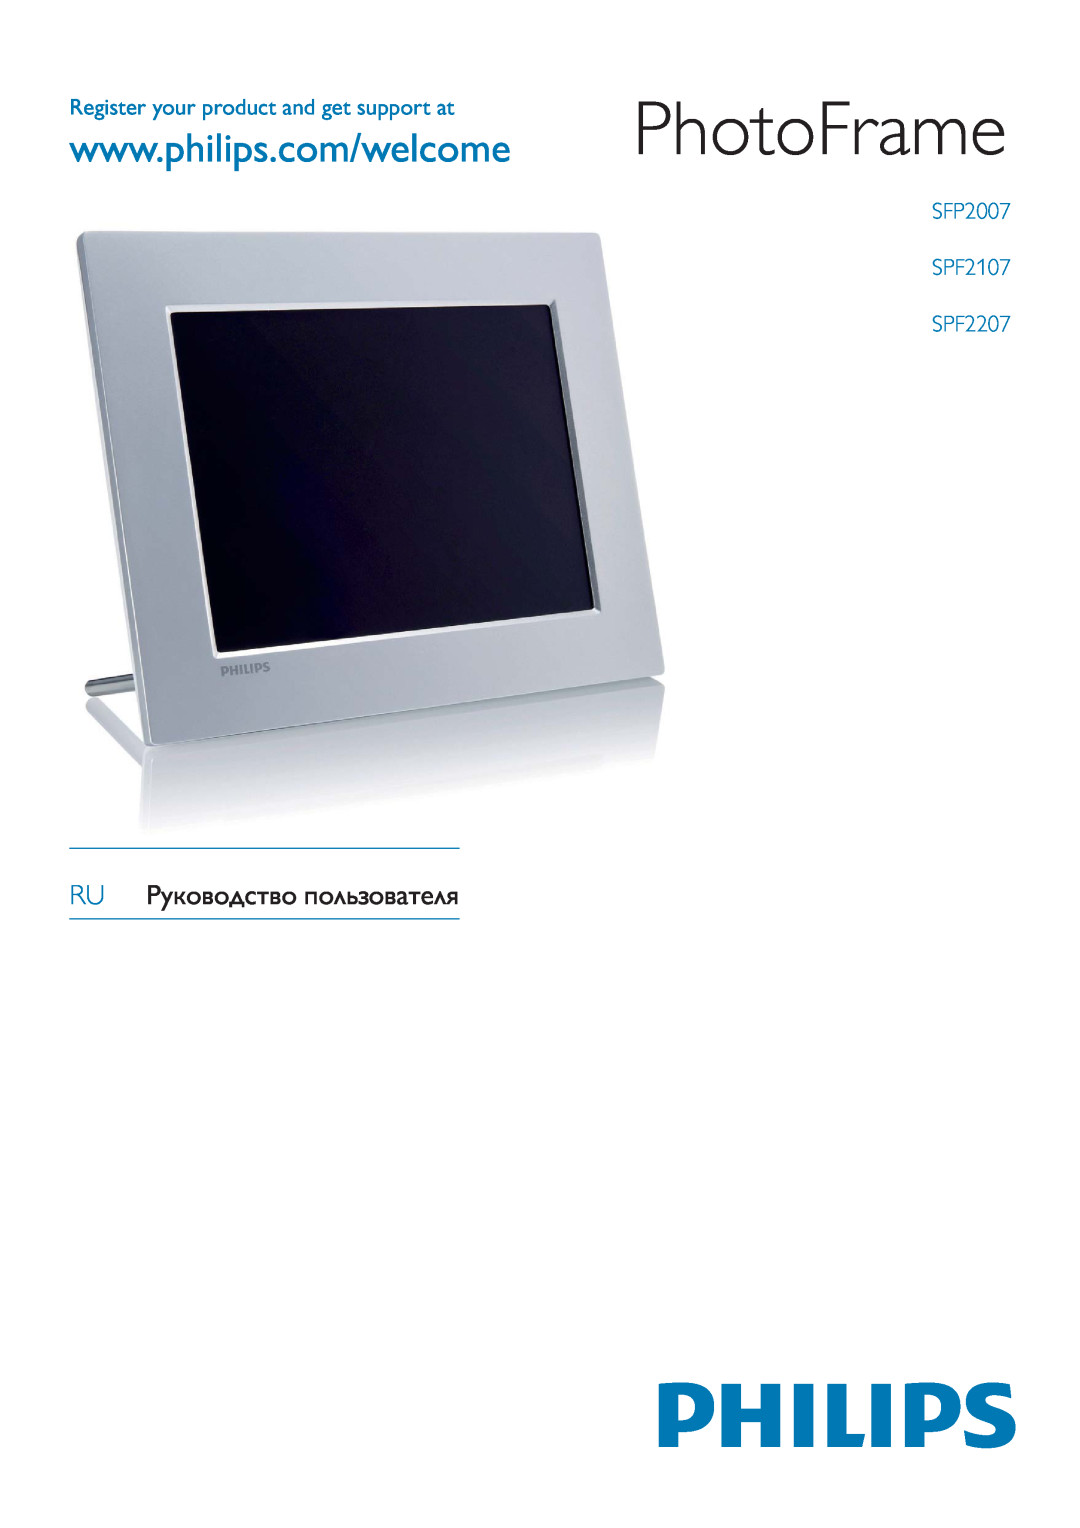 Philips user manual PhotoFrame, Register your product and get support at, SFP2007 SPF2107 SPF2207 